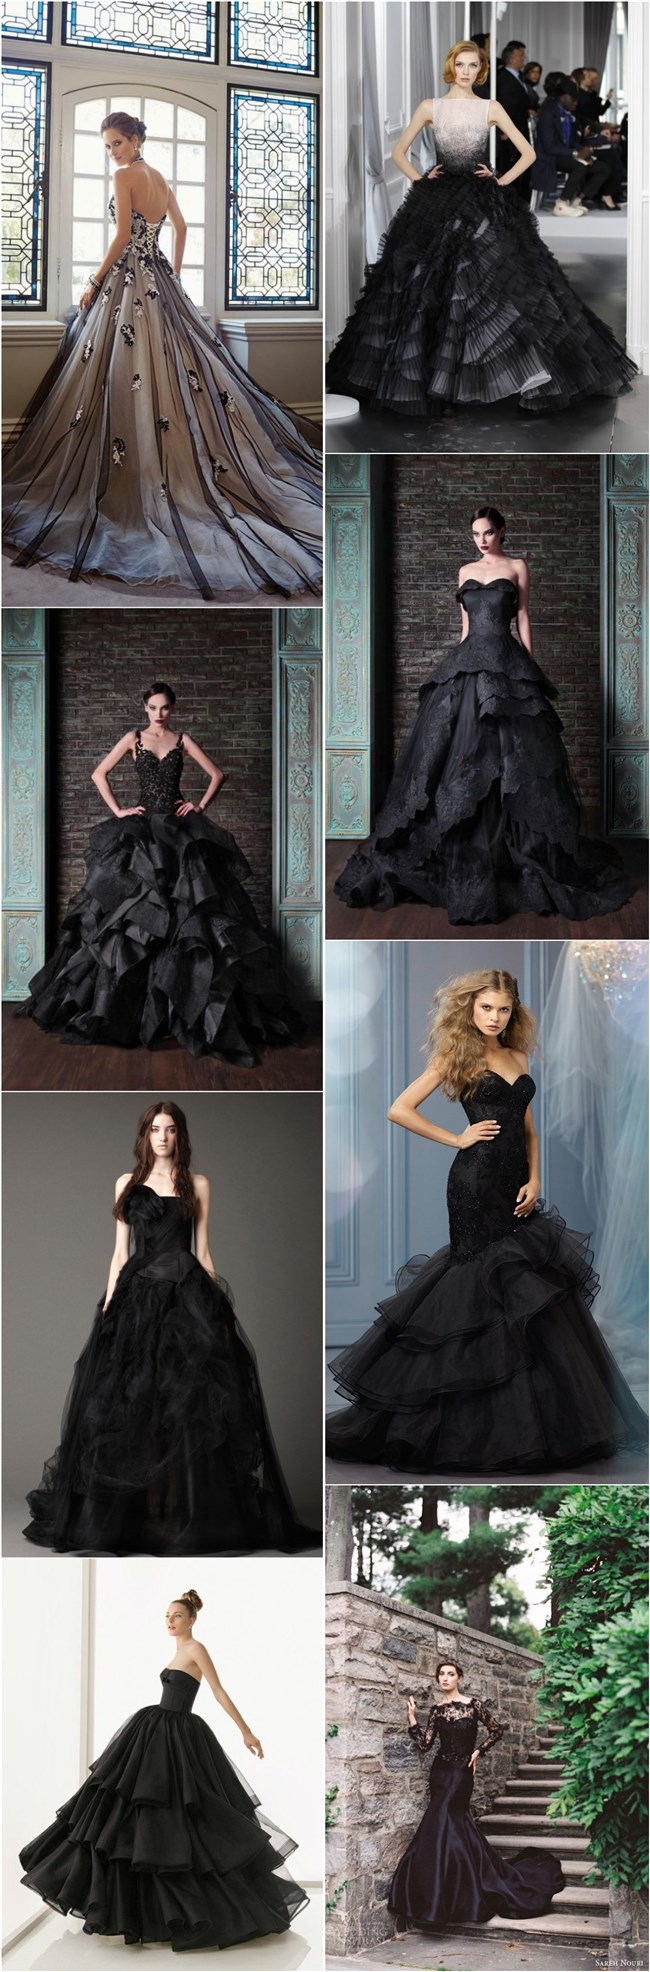 wedding gowns for black brides